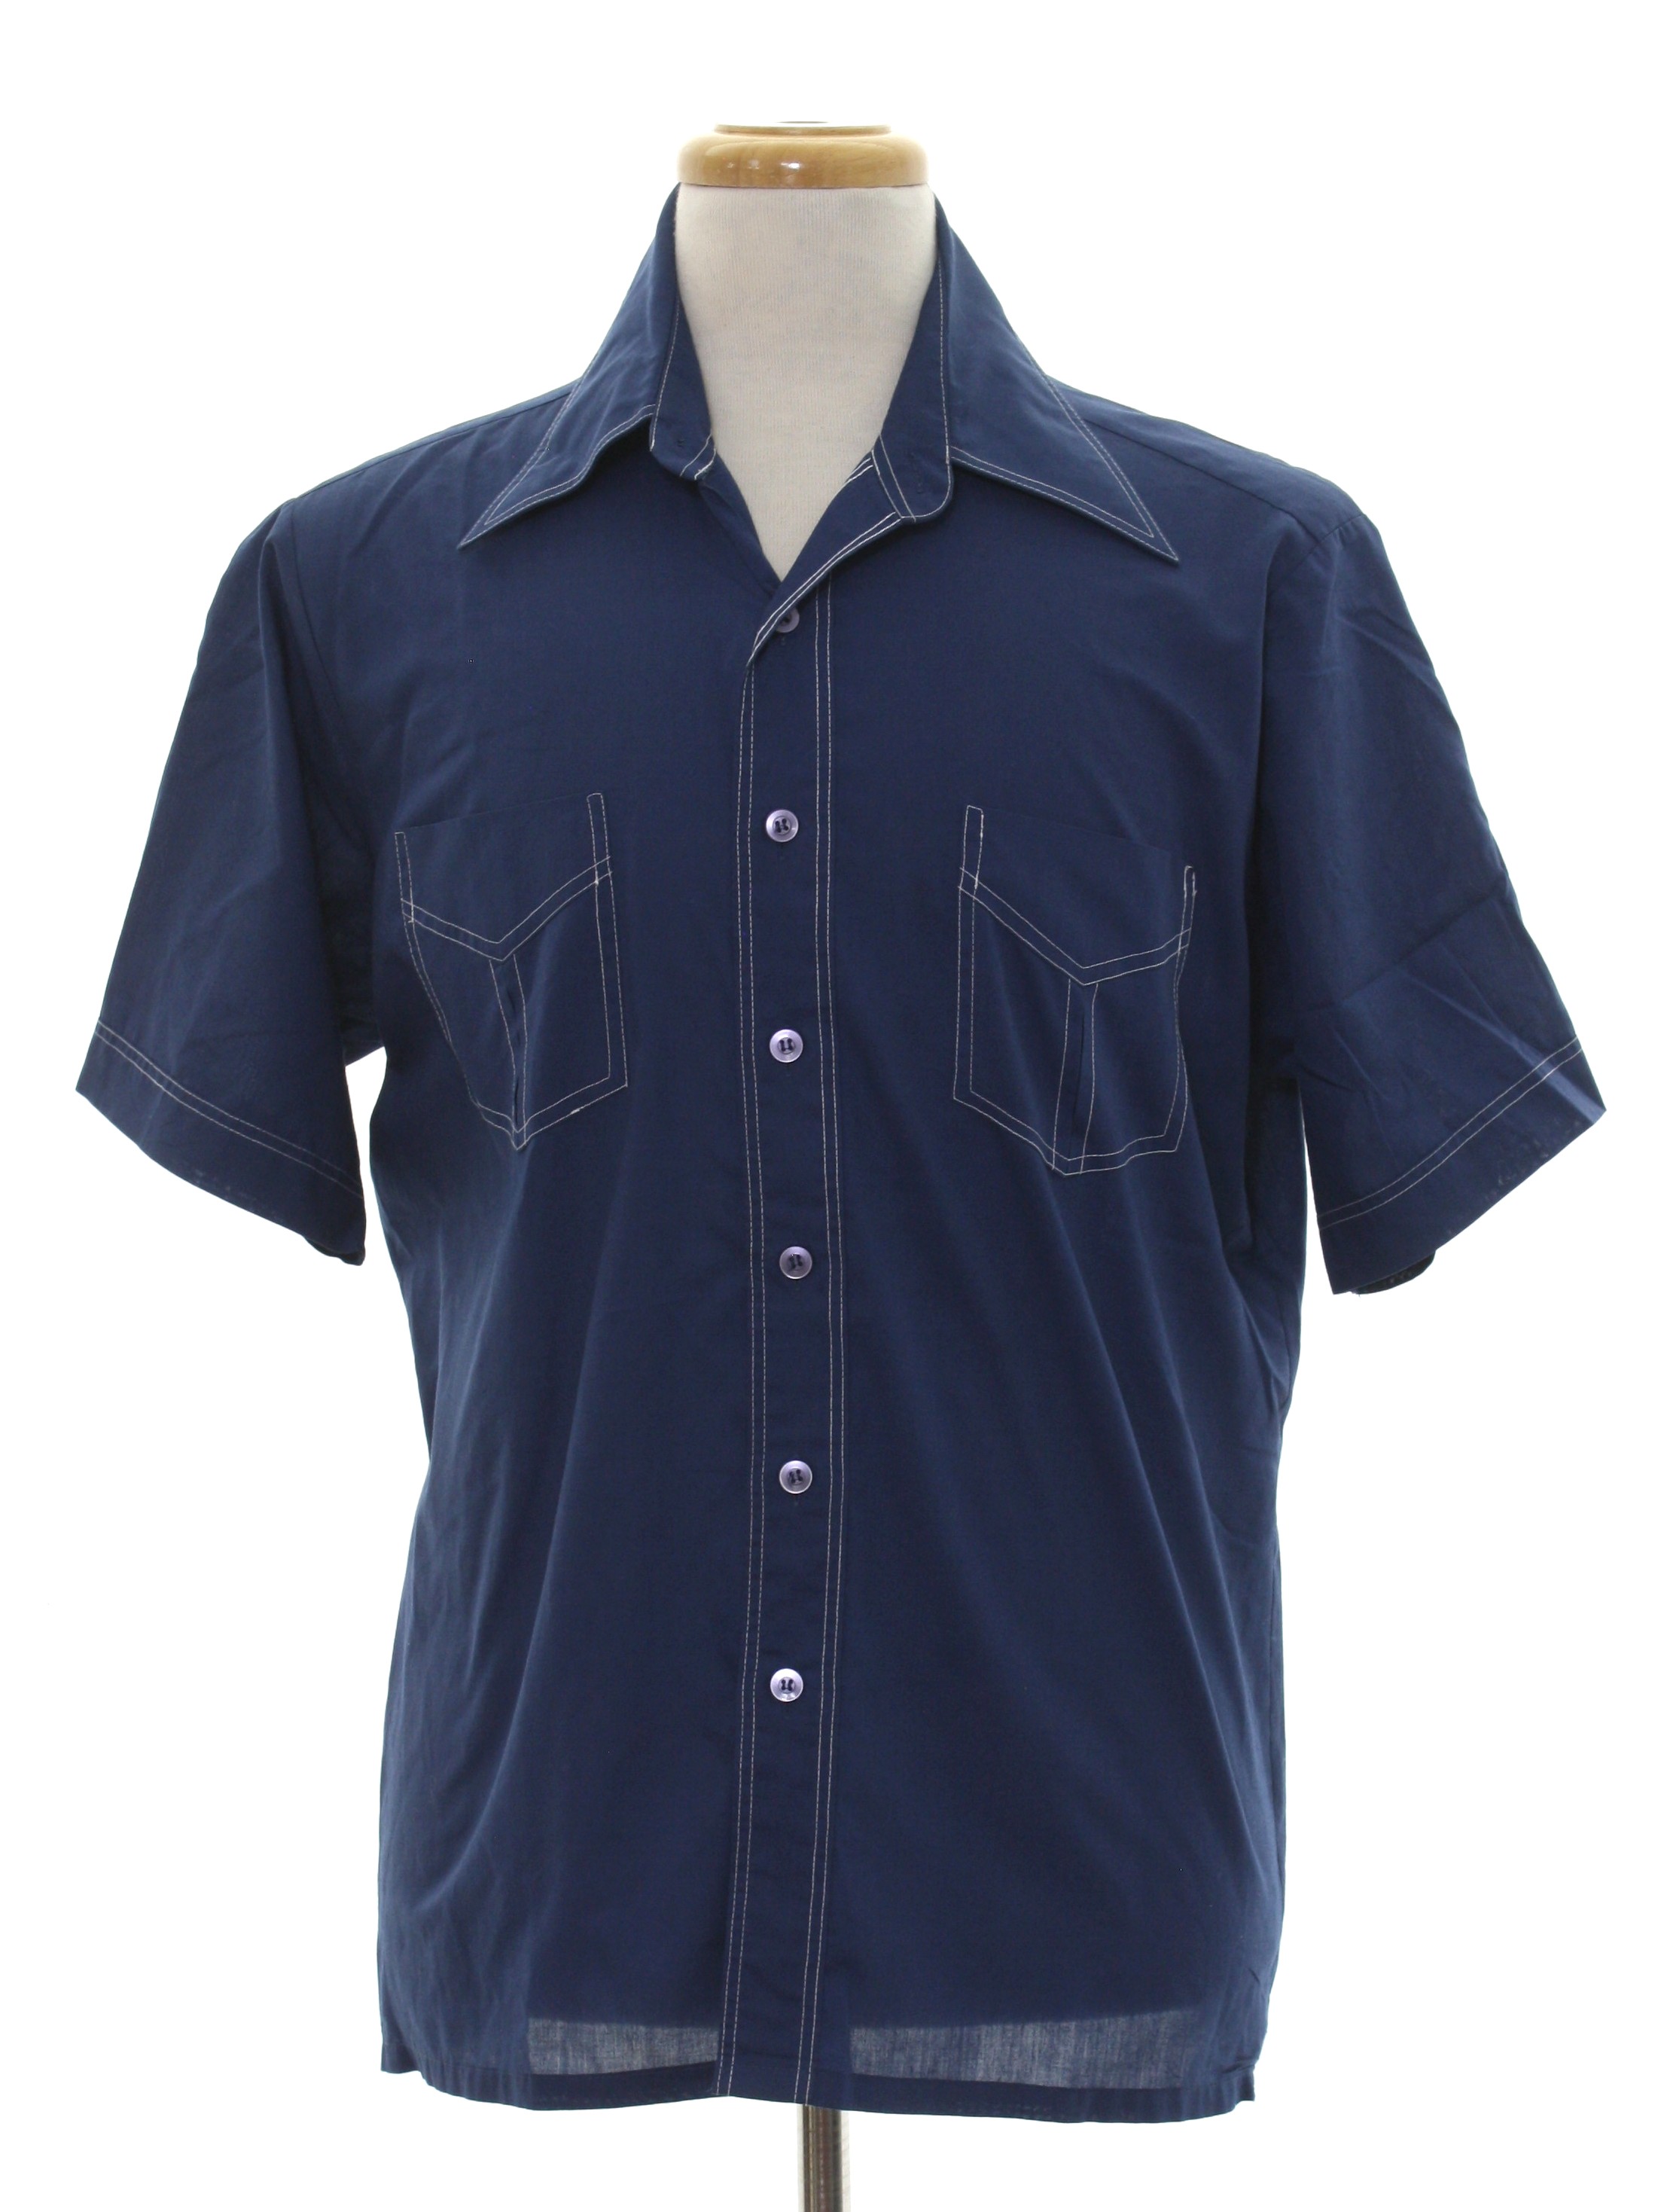 1970's Retro Shirt: Late 70s or Early 80s -JC Penny- Mens navy blue ...